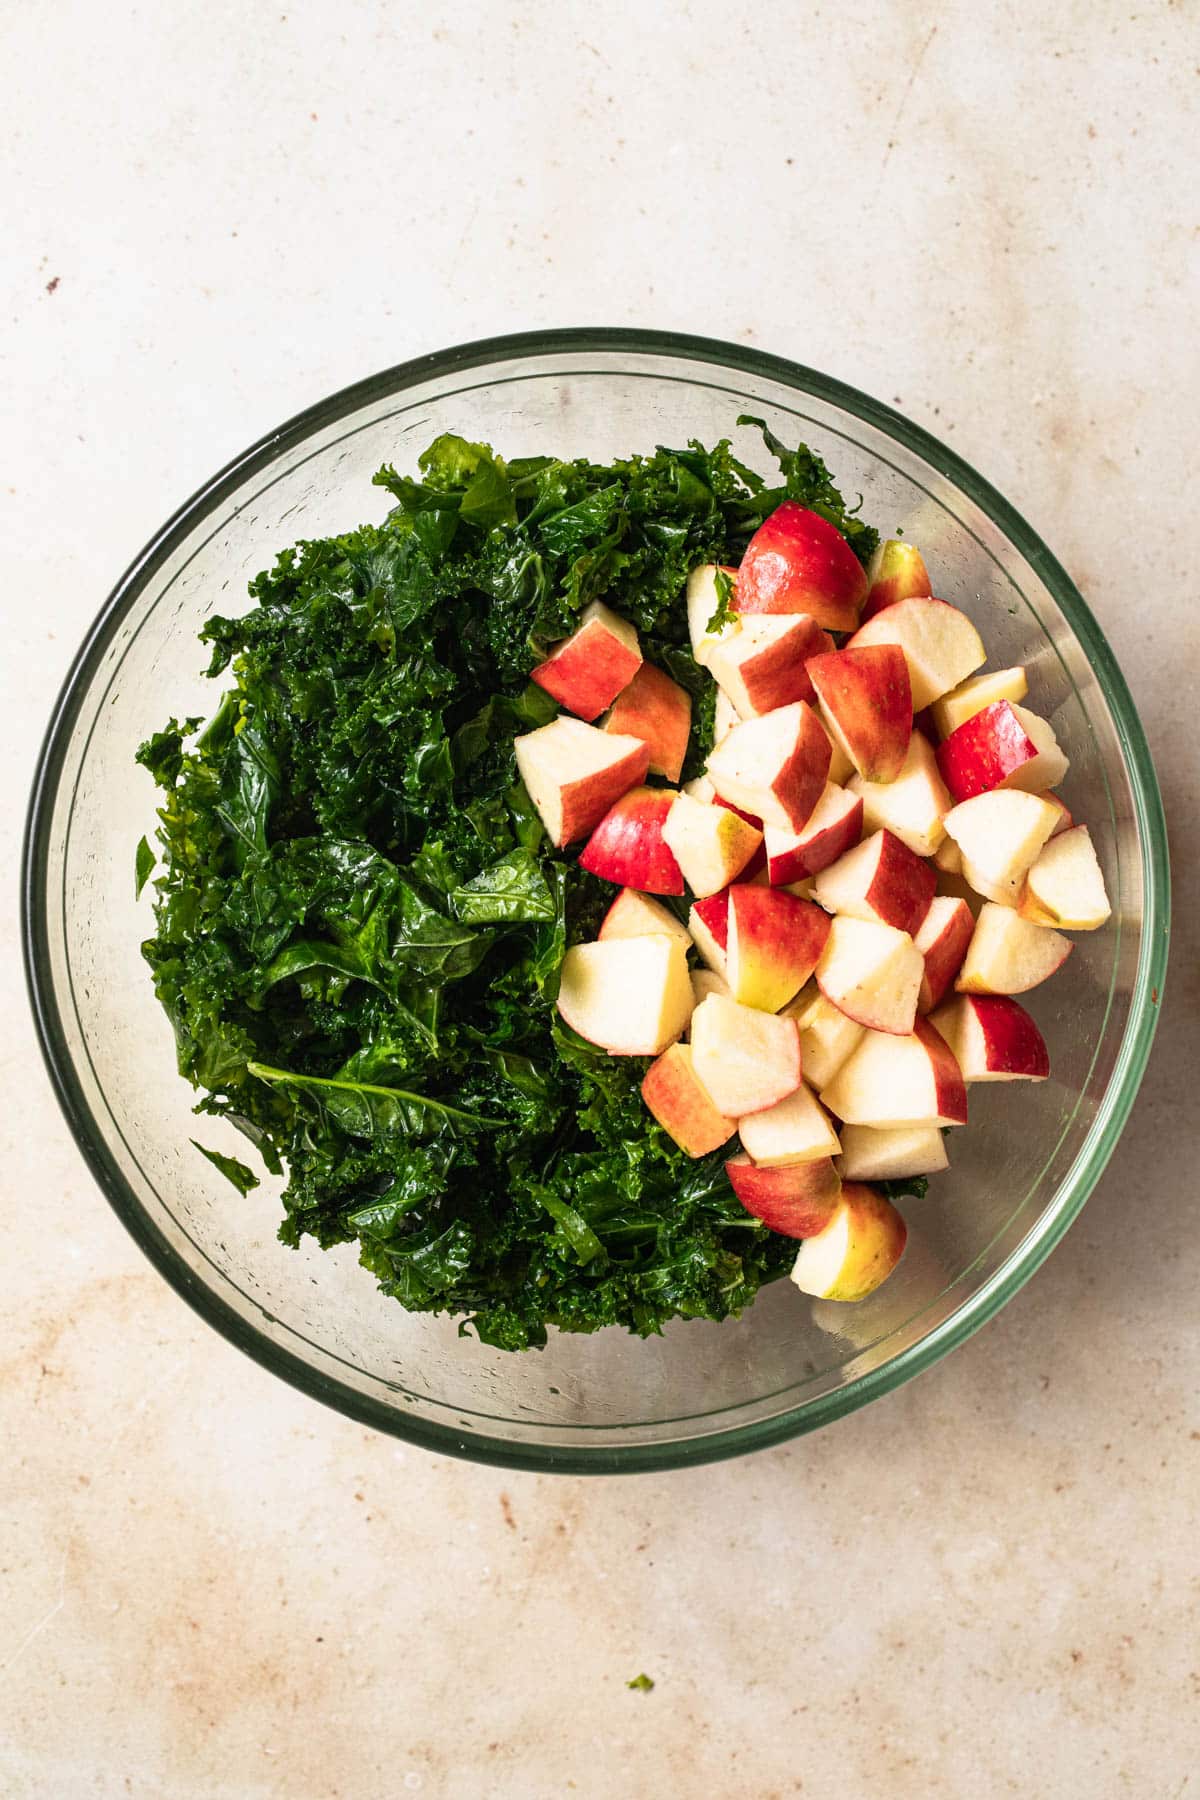 Massaged kale and diced red apples in a bowl.